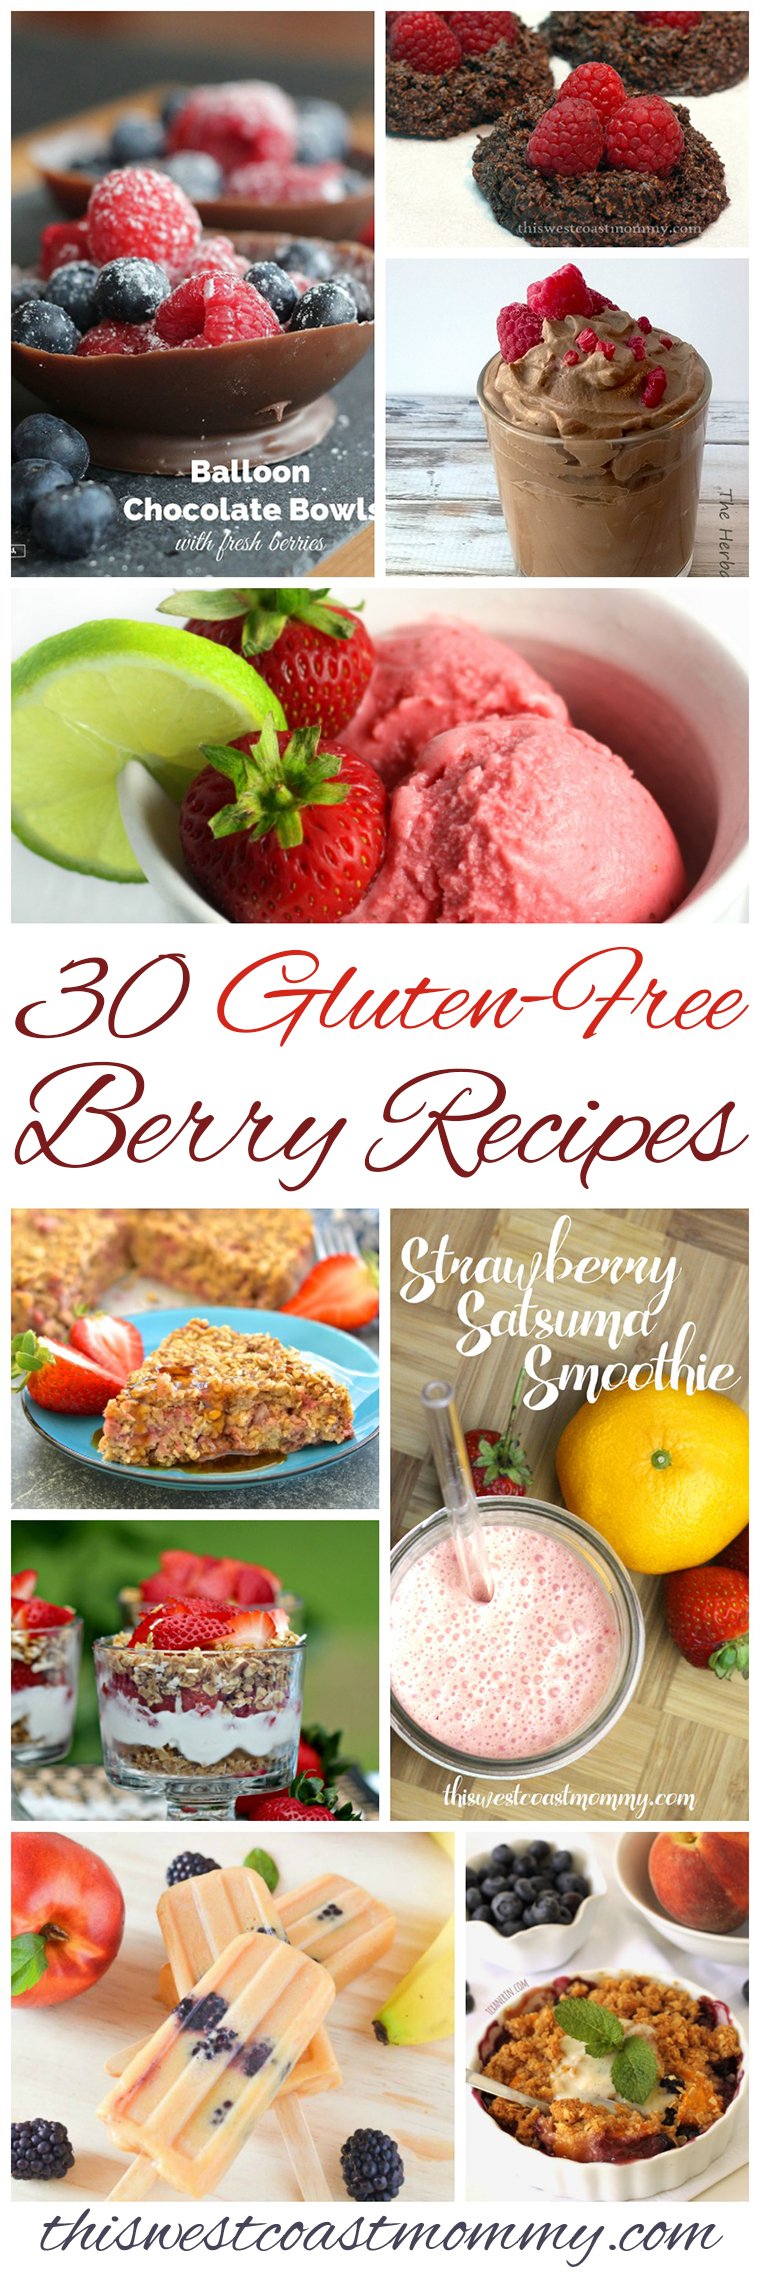 Celebrate the summer sunshine and berry season with 30 of the most delicious gluten-free berry recipes around!